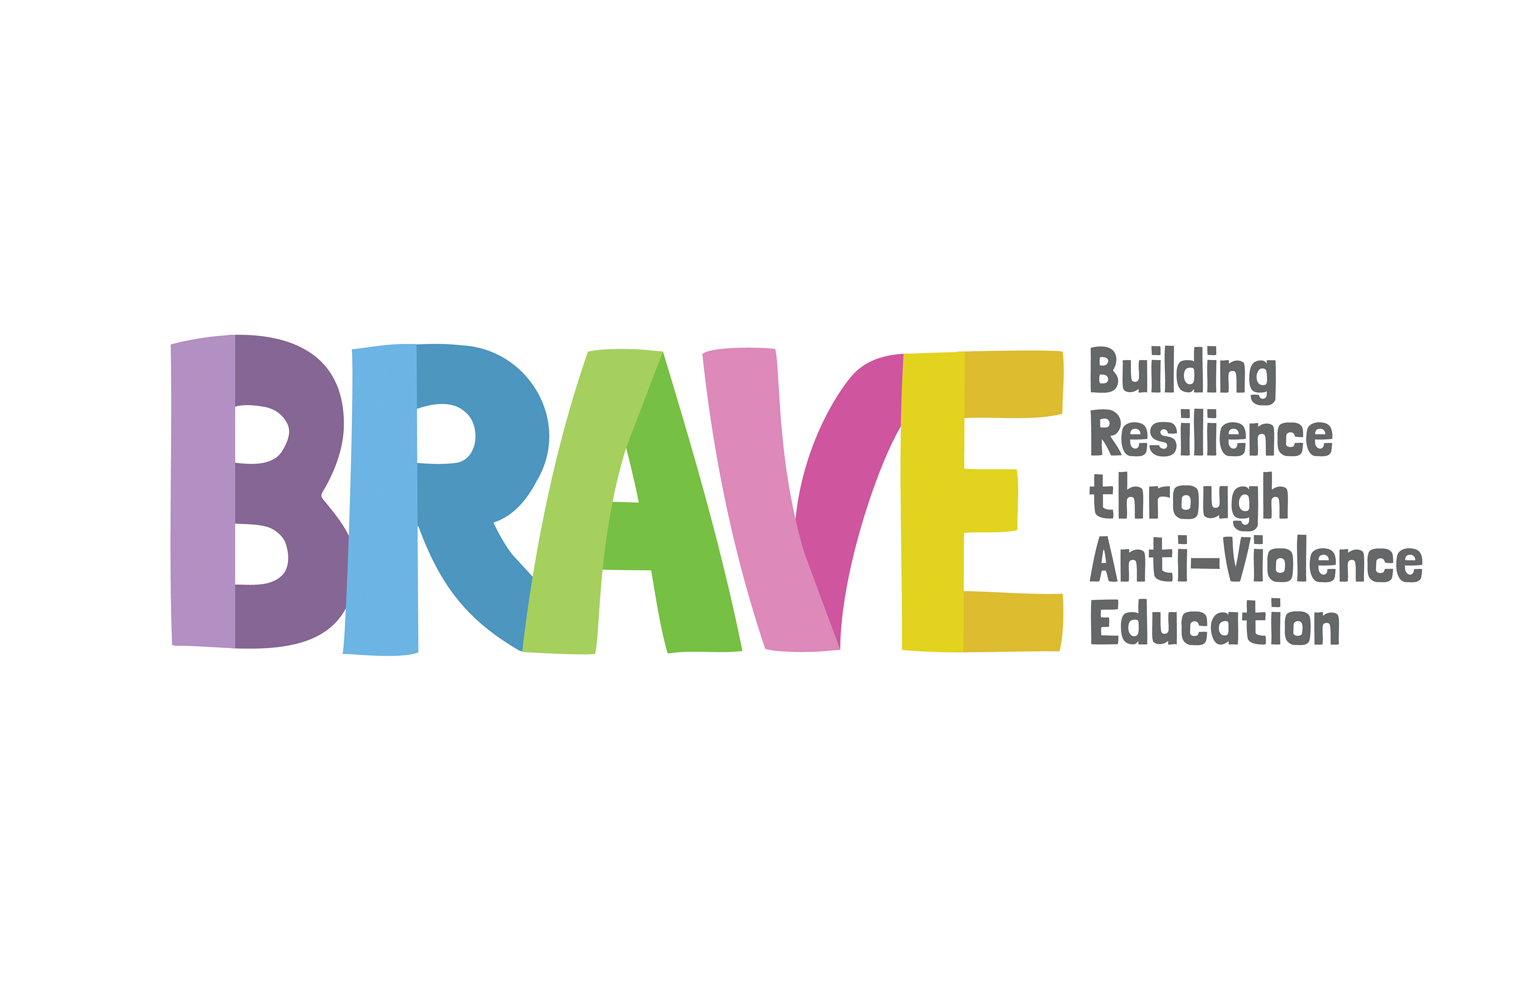 BRAVE/Centre for Building Resilience through Anti-Violence Education